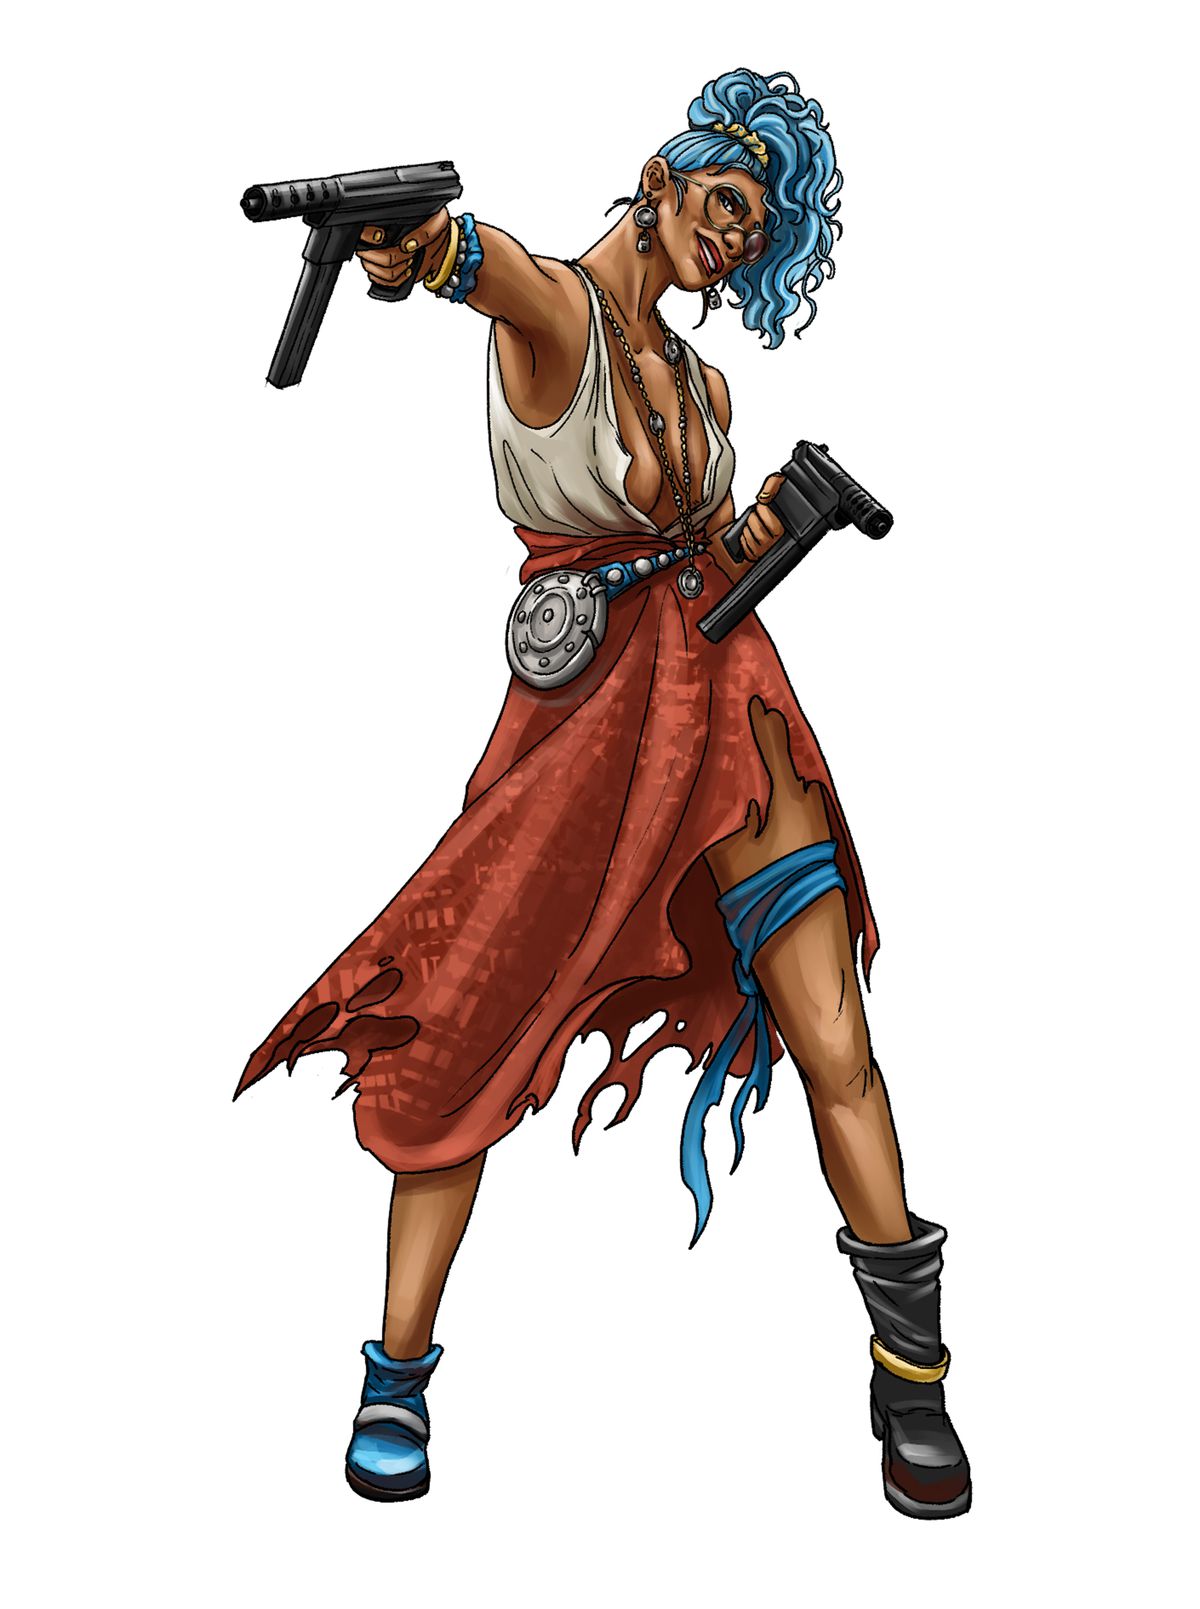 A dashing woman with blue hair and mismatched clothes lets loose with an automatic pistol.